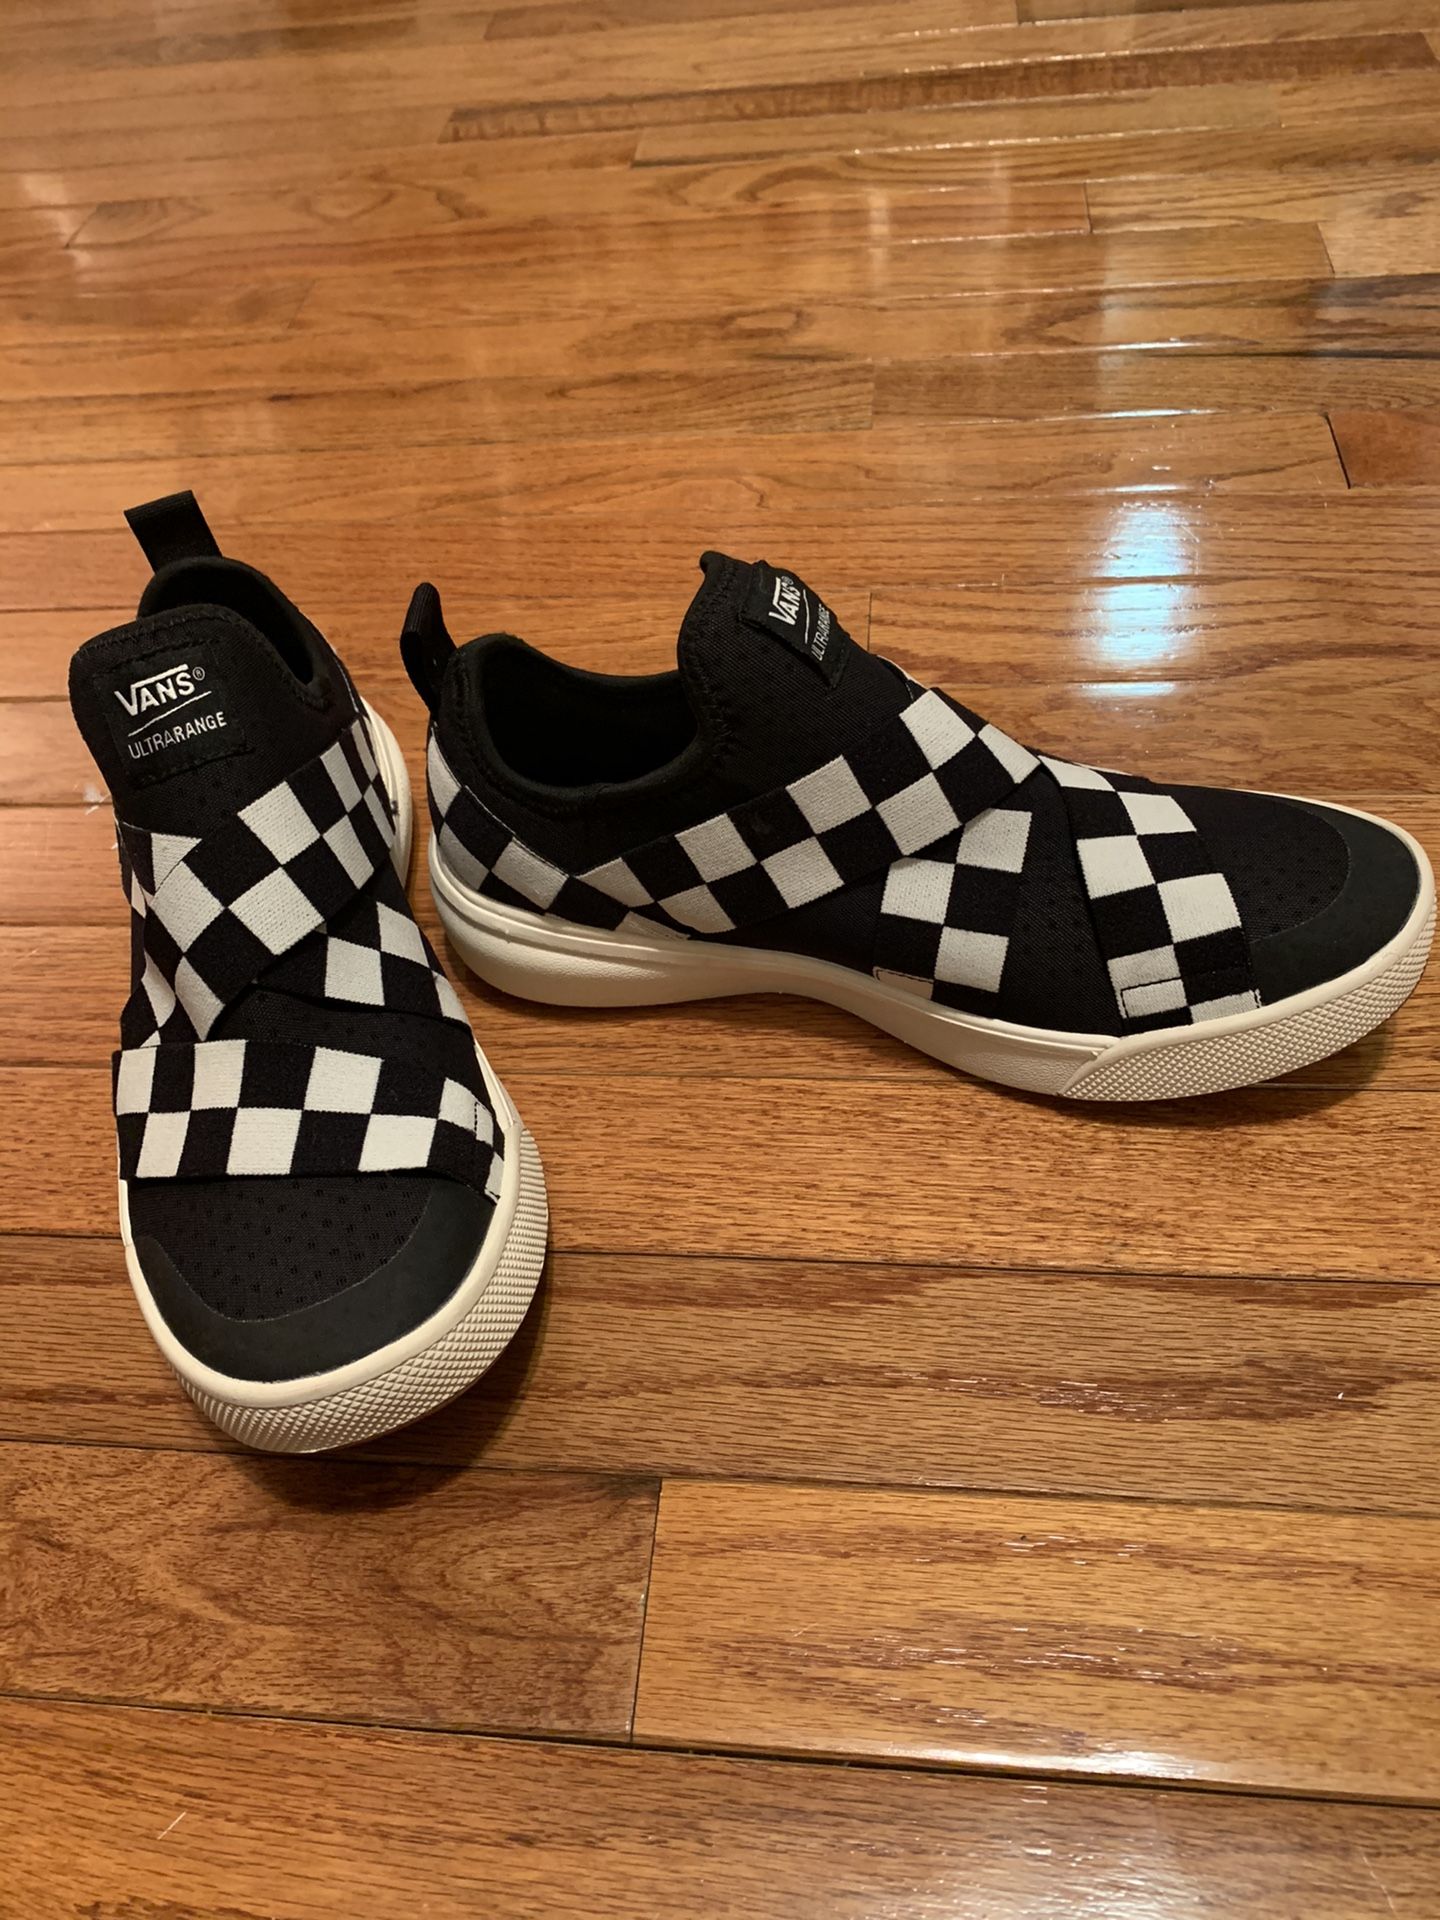 Size 10 women’s brand new vans with tags